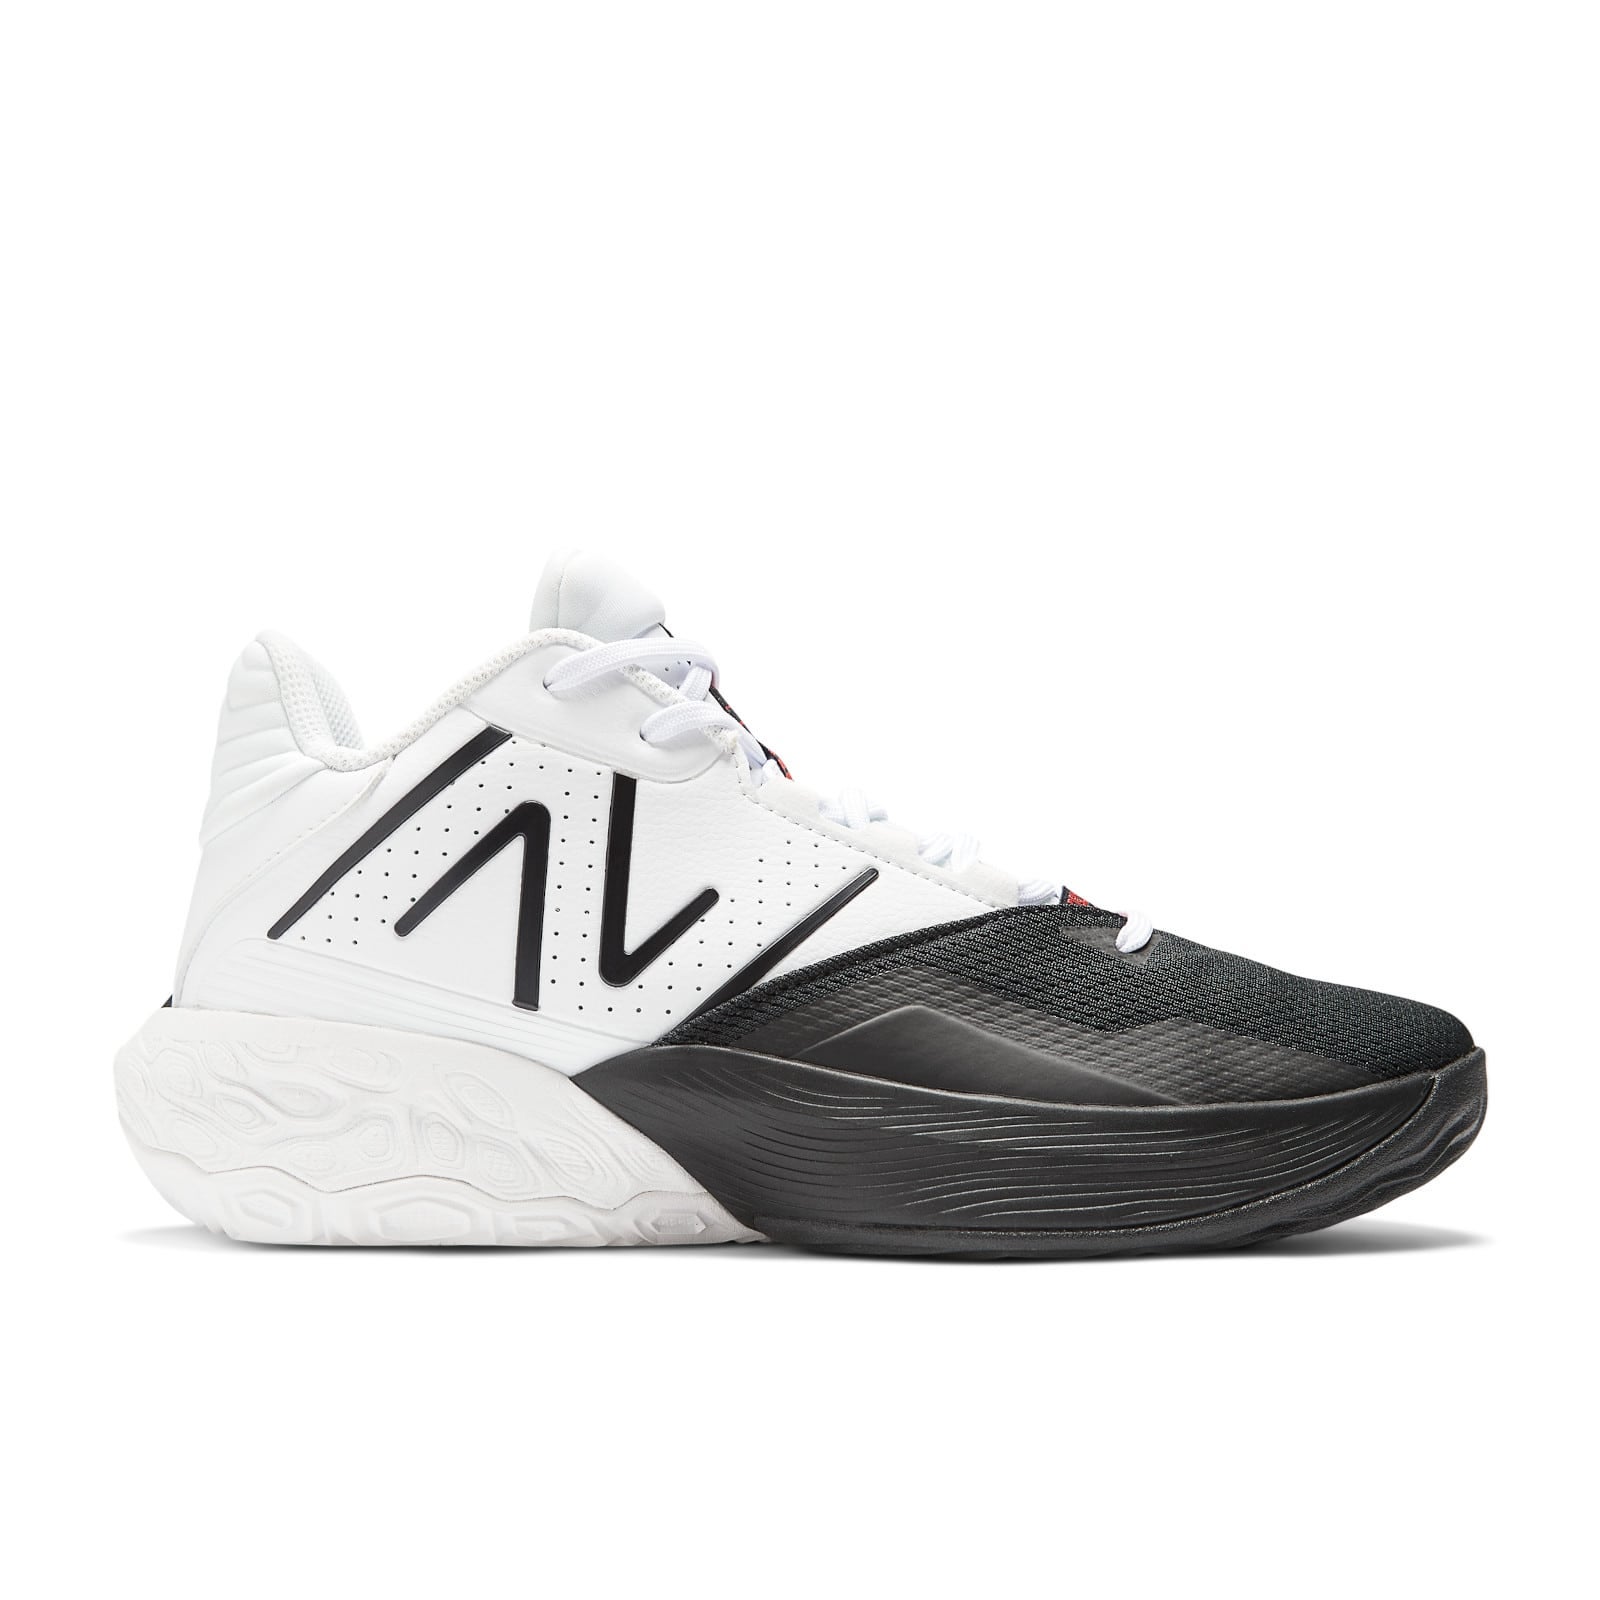 NB公式】ニューバランス | FuelCell Two Wxy v4 BR4|New Balance【公式